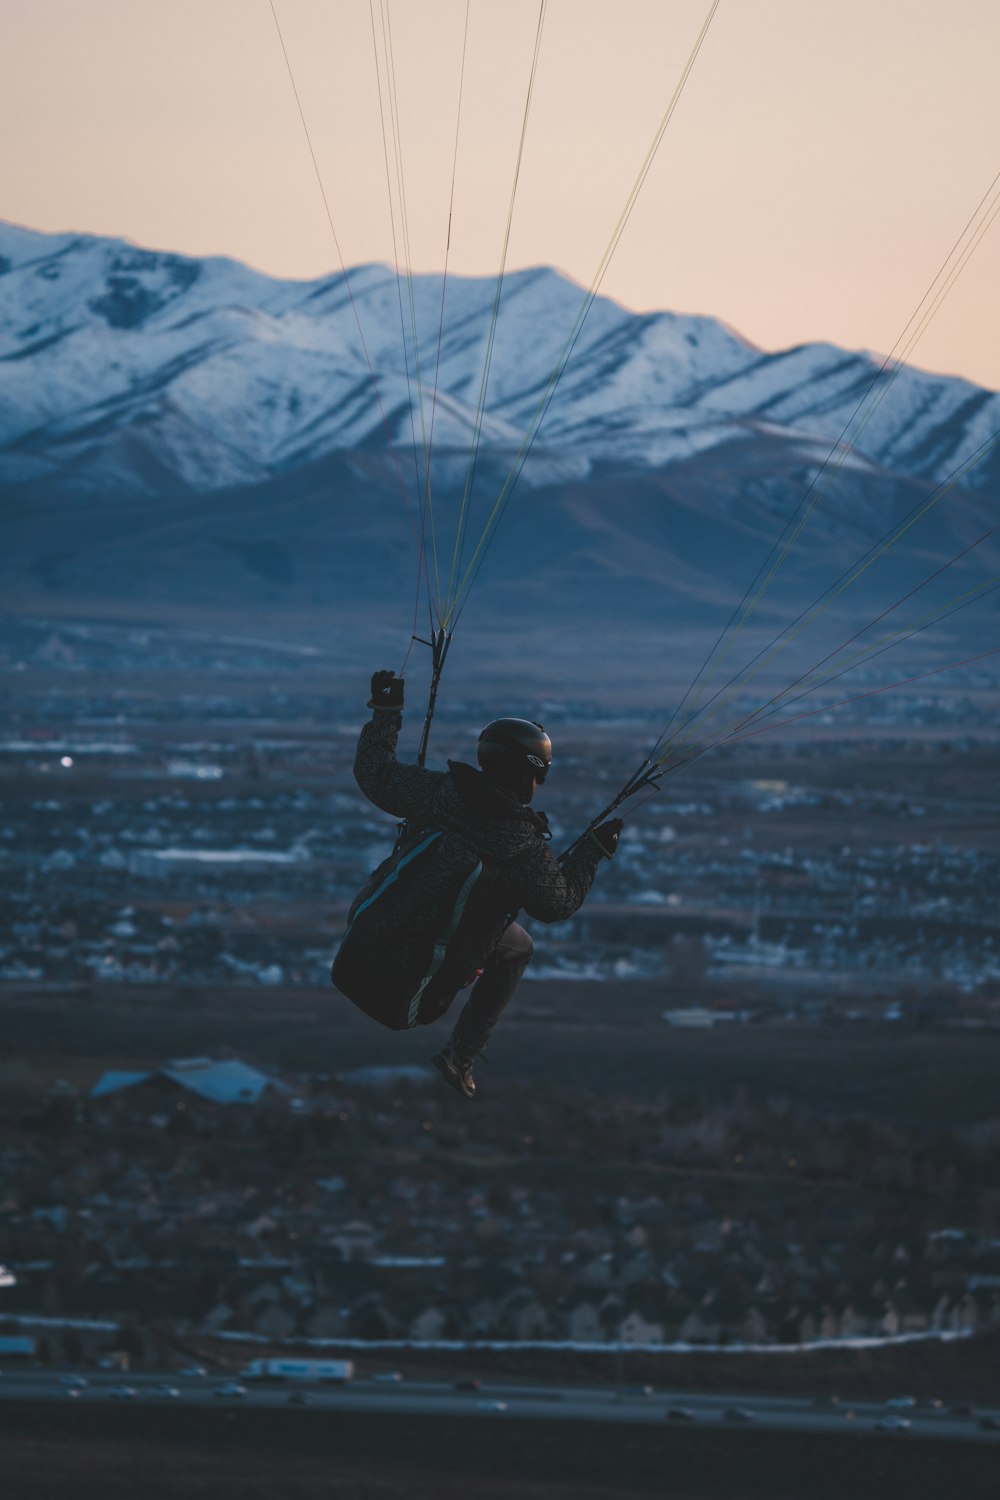 a man flying through the air while holding onto a parachute